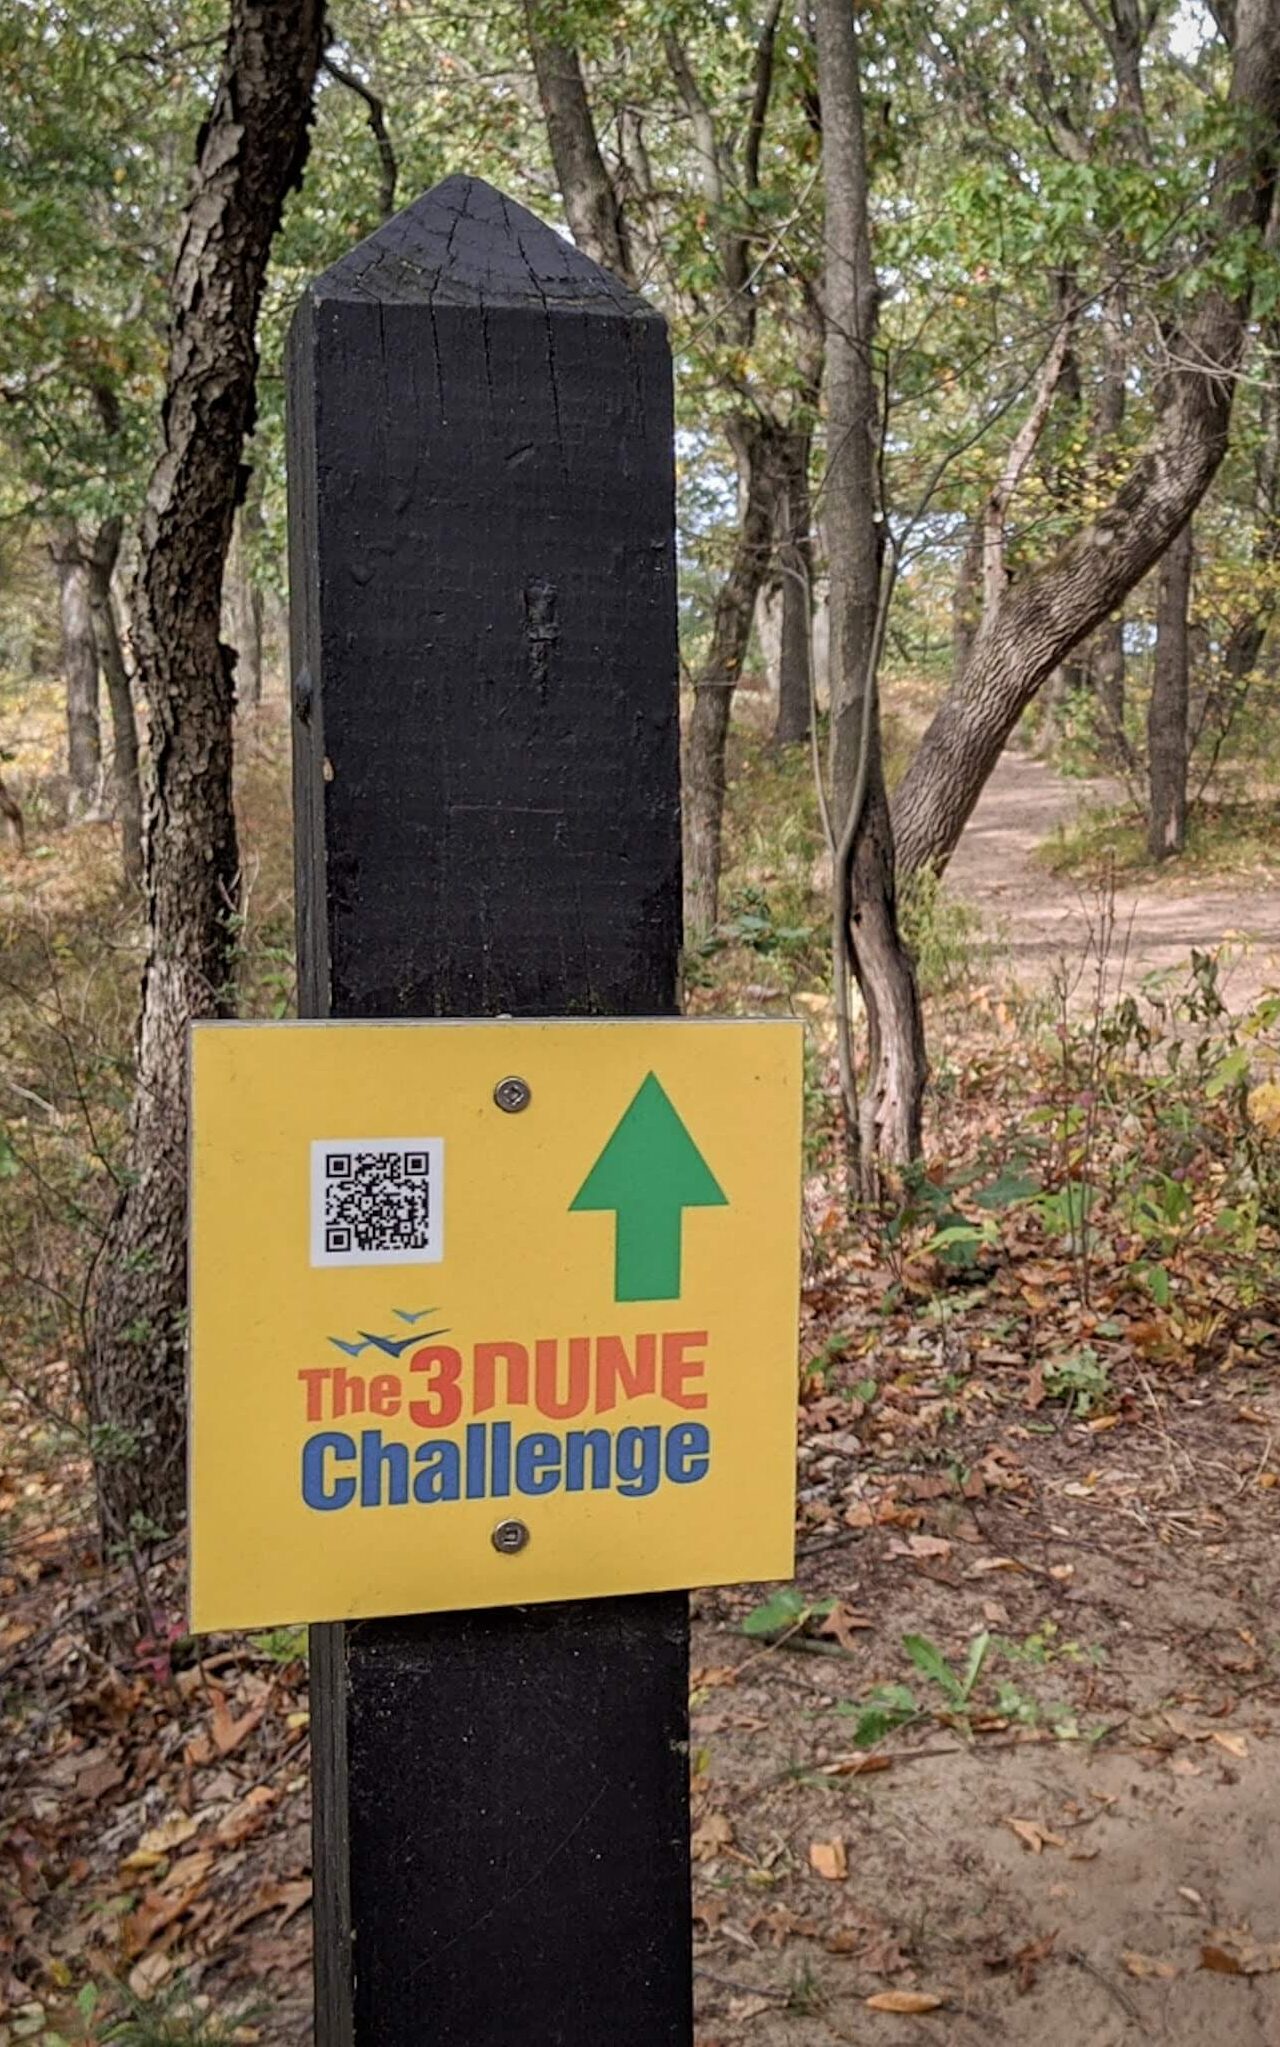 A trail marker that reads 3 dune challenge with a green arrow pointing the way